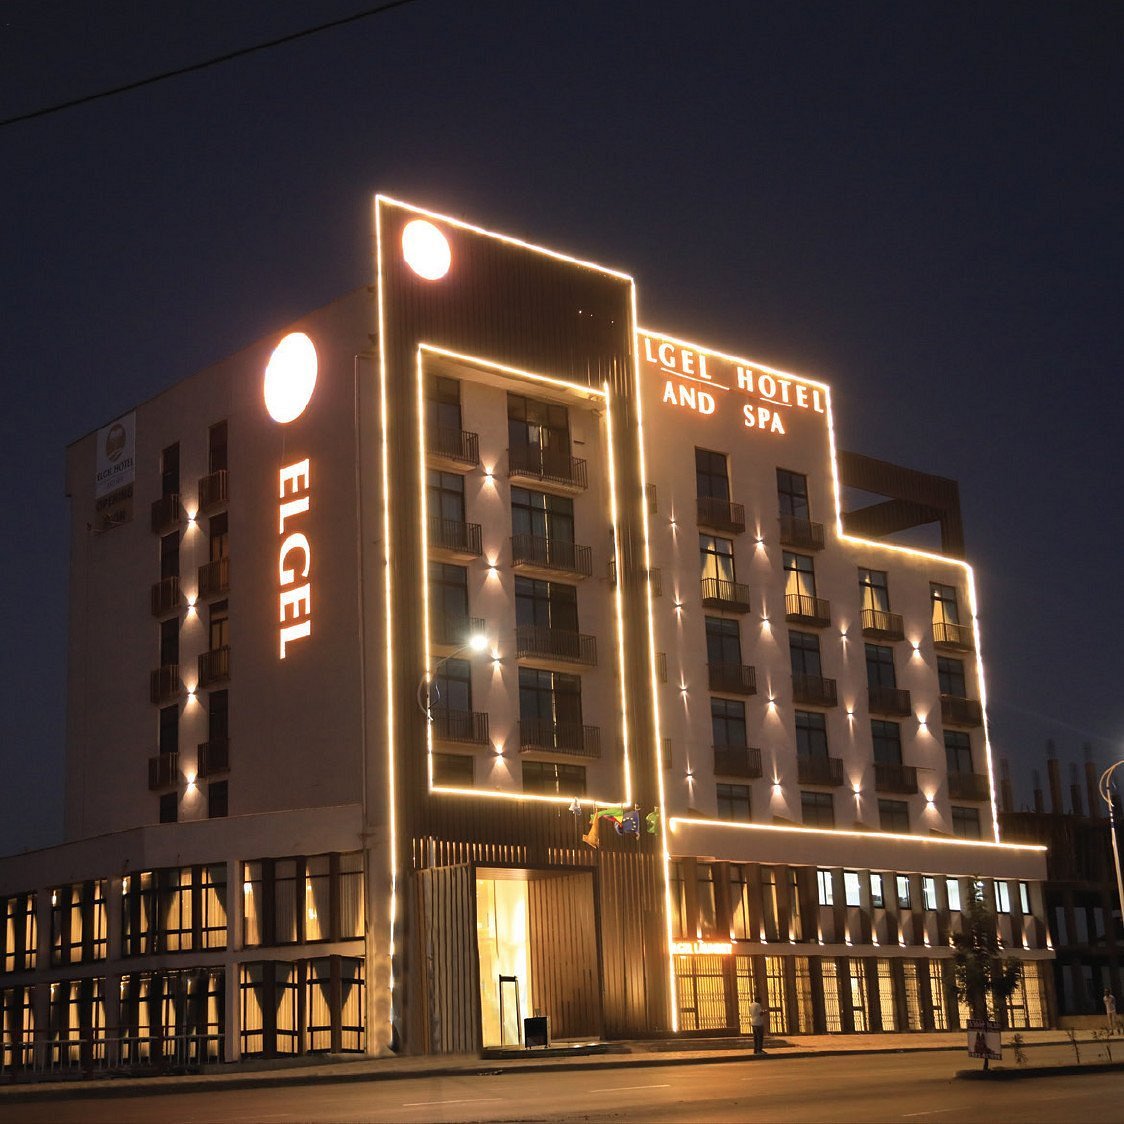 Elgel Hotel And Spa, hotel in Addis Ababa